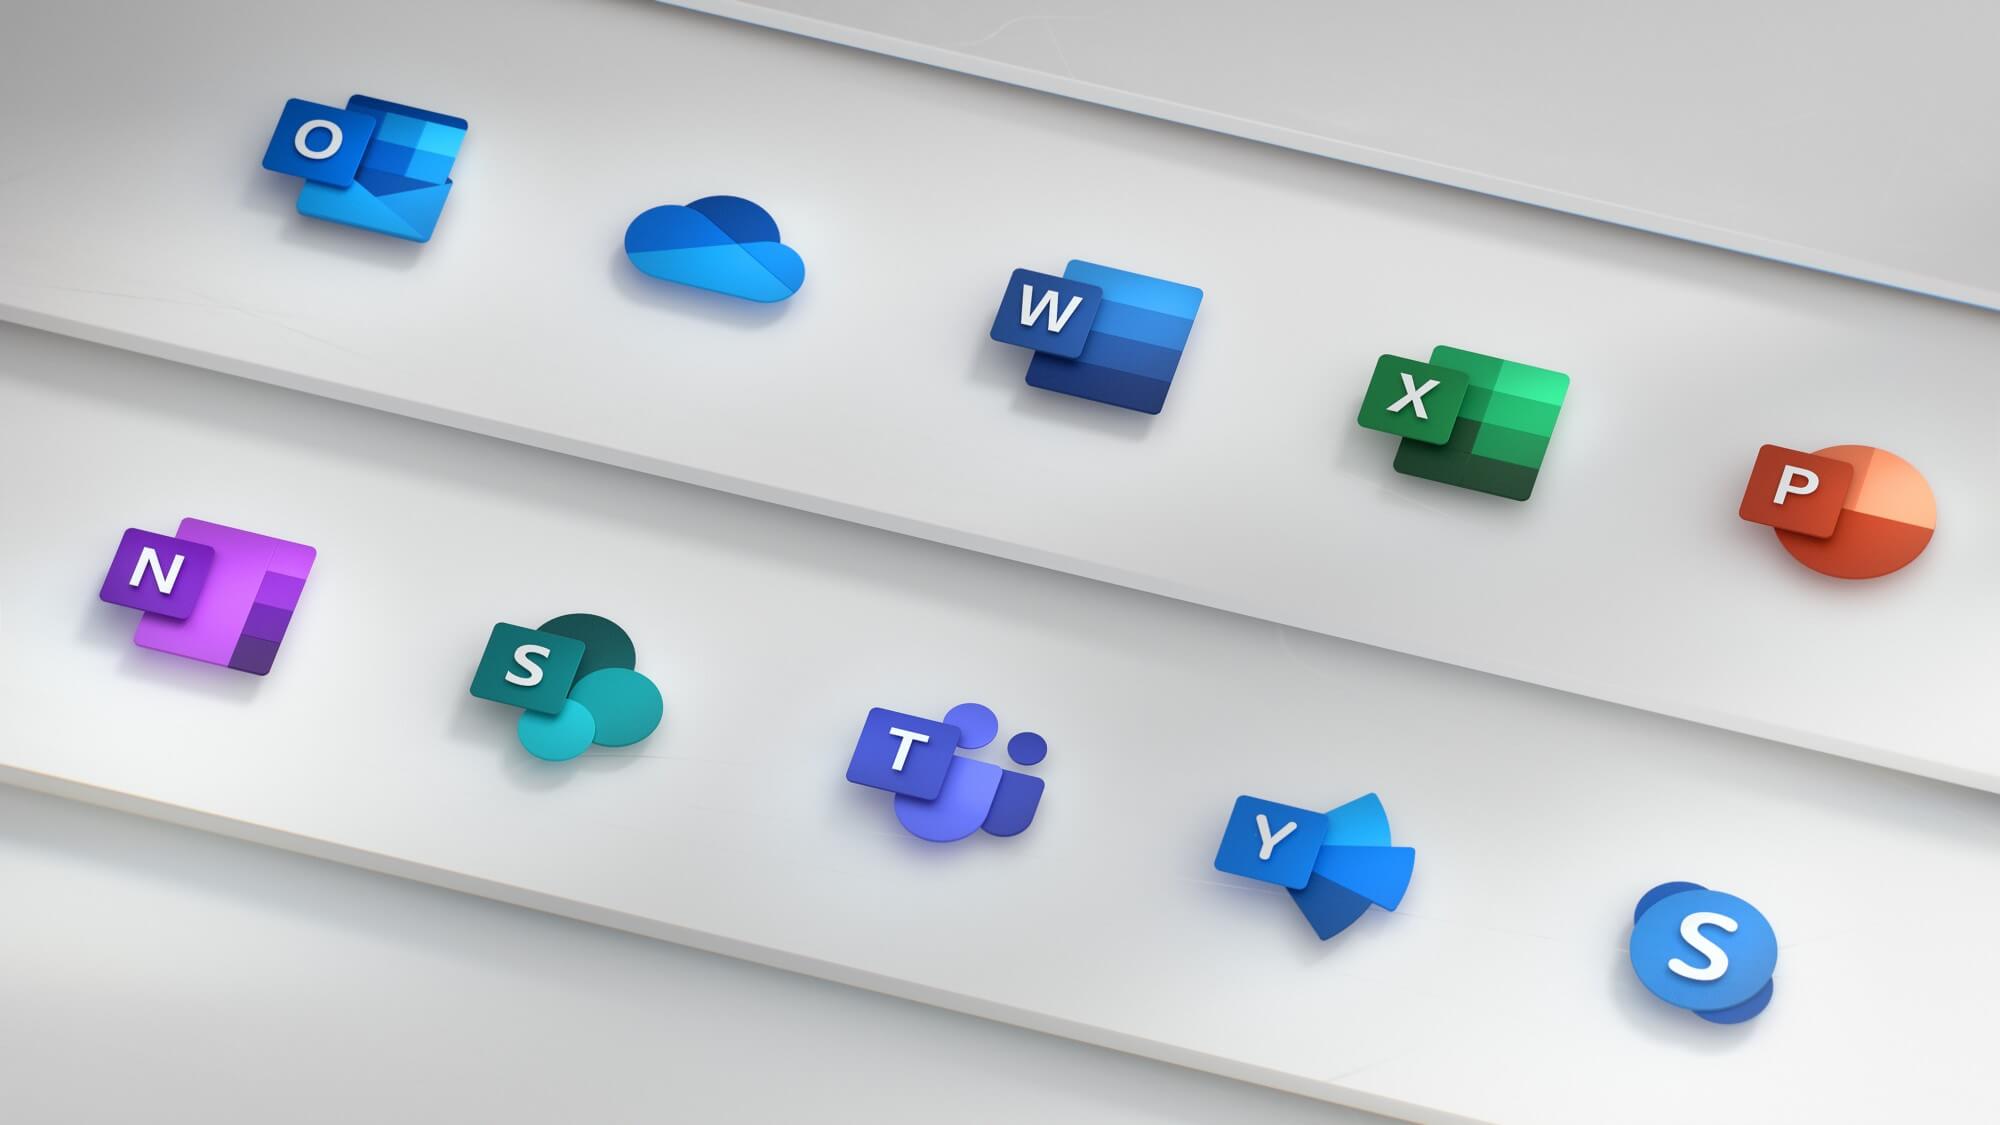 Microsoft redesigns Office icons as part of a larger Office design overhaul